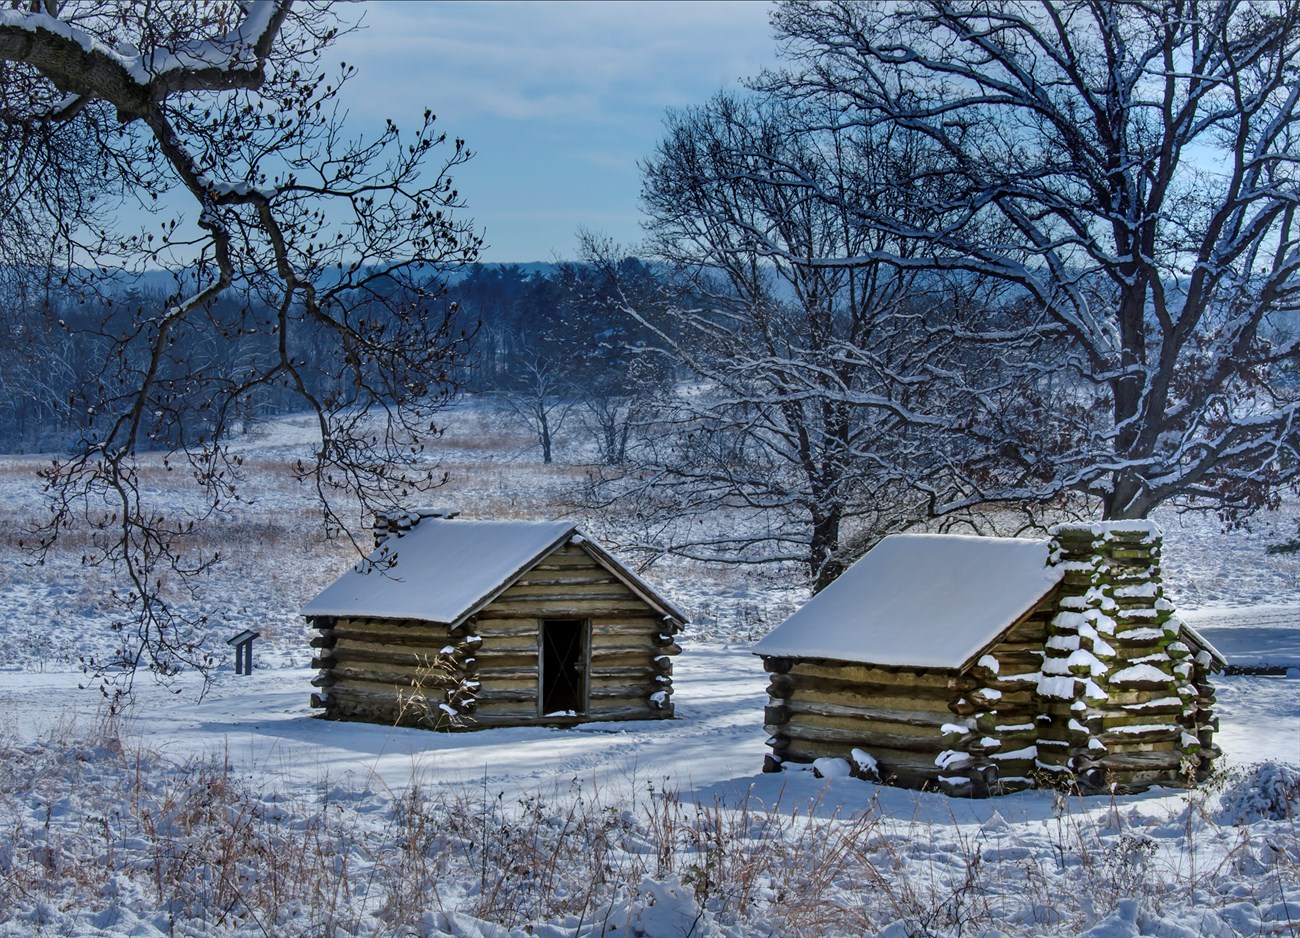 two log huts and a snow covered landscape